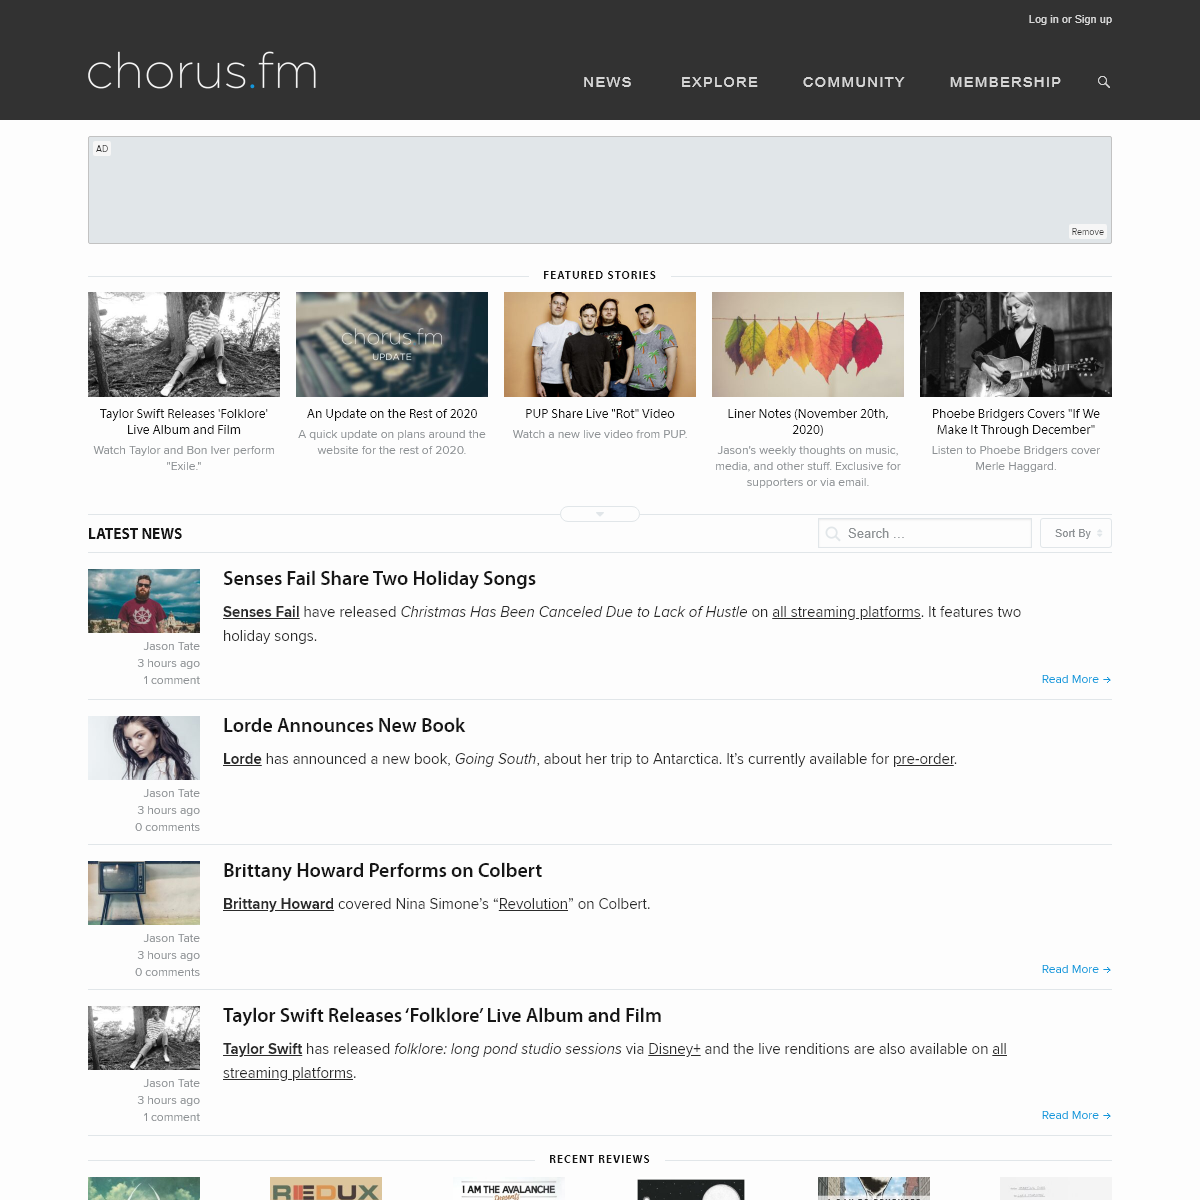 A complete backup of chorus.fm